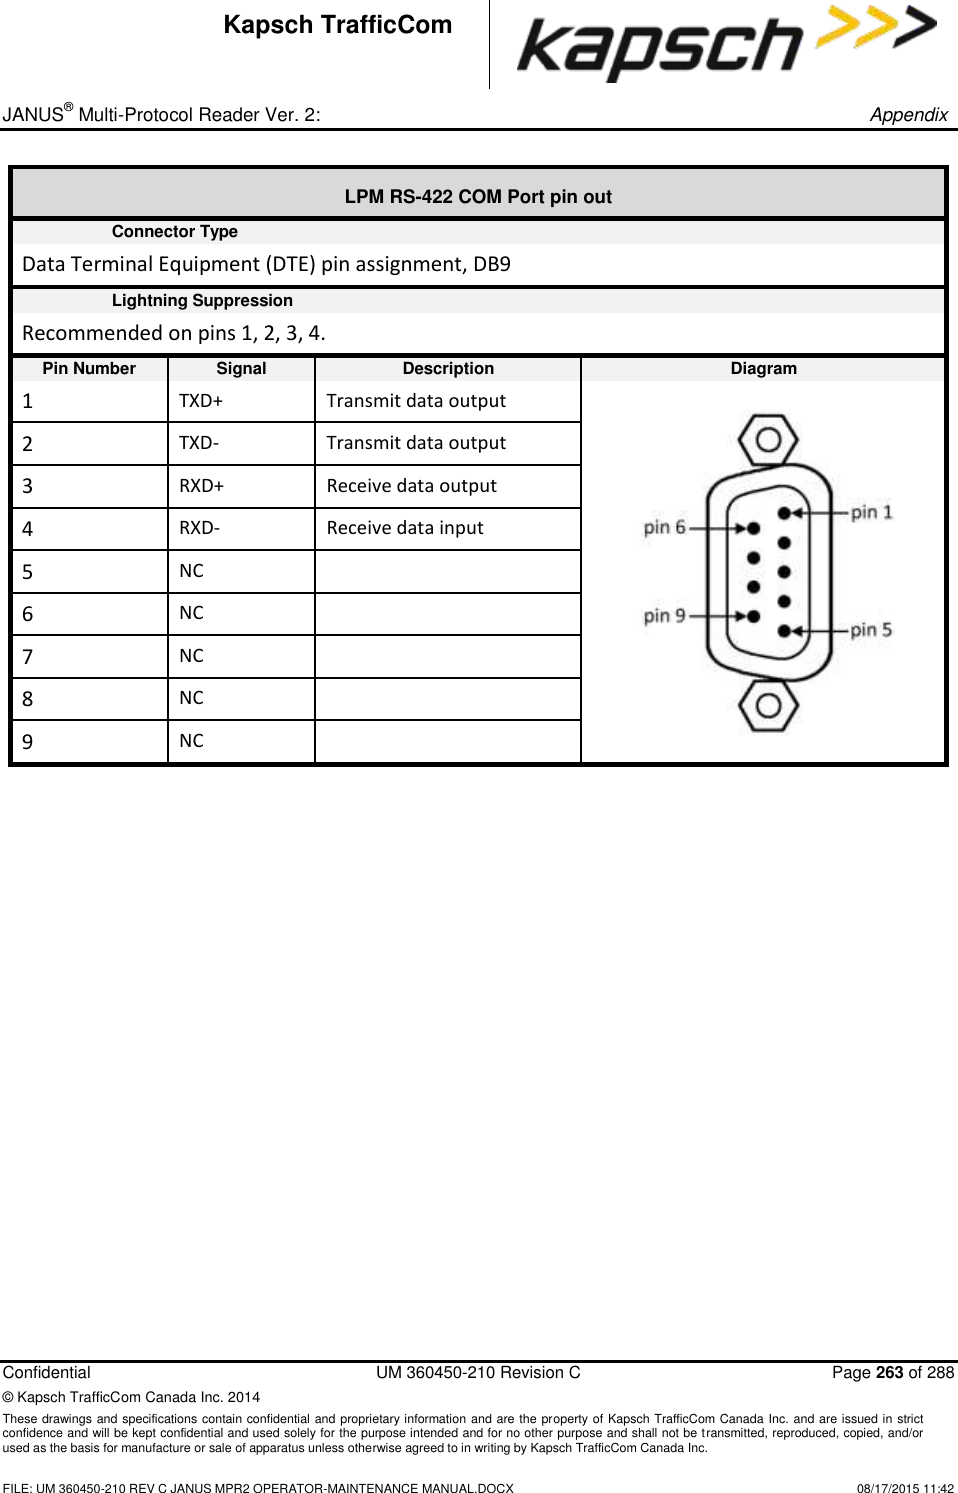 _ JANUS® Multi-Protocol Reader Ver. 2:       Appendix   Confidential  UM 360450-210 Revision C  Page 263 of 288 © Kapsch TrafficCom Canada Inc. 2014 These drawings and specifications contain confidential and proprietary information and are the property of Kapsch TrafficCom Canada Inc. and are issued in strict confidence and will be kept confidential and used solely for the purpose intended and for no other purpose and shall not be transmitted, reproduced, copied, and/or used as the basis for manufacture or sale of apparatus unless otherwise agreed to in writing by Kapsch TrafficCom Canada Inc.    FILE: UM 360450-210 REV C JANUS MPR2 OPERATOR-MAINTENANCE MANUAL.DOCX   08/17/2015 11:42 Kapsch TrafficCom LPM RS-422 COM Port pin out Connector Type Data Terminal Equipment (DTE) pin assignment, DB9  Lightning Suppression Recommended on pins 1, 2, 3, 4. Pin Number Signal Description Diagram 1 TXD+ Transmit data output  2 TXD- Transmit data output 3 RXD+ Receive data output 4 RXD- Receive data input 5 NC  6 NC  7 NC  8 NC  9 NC           